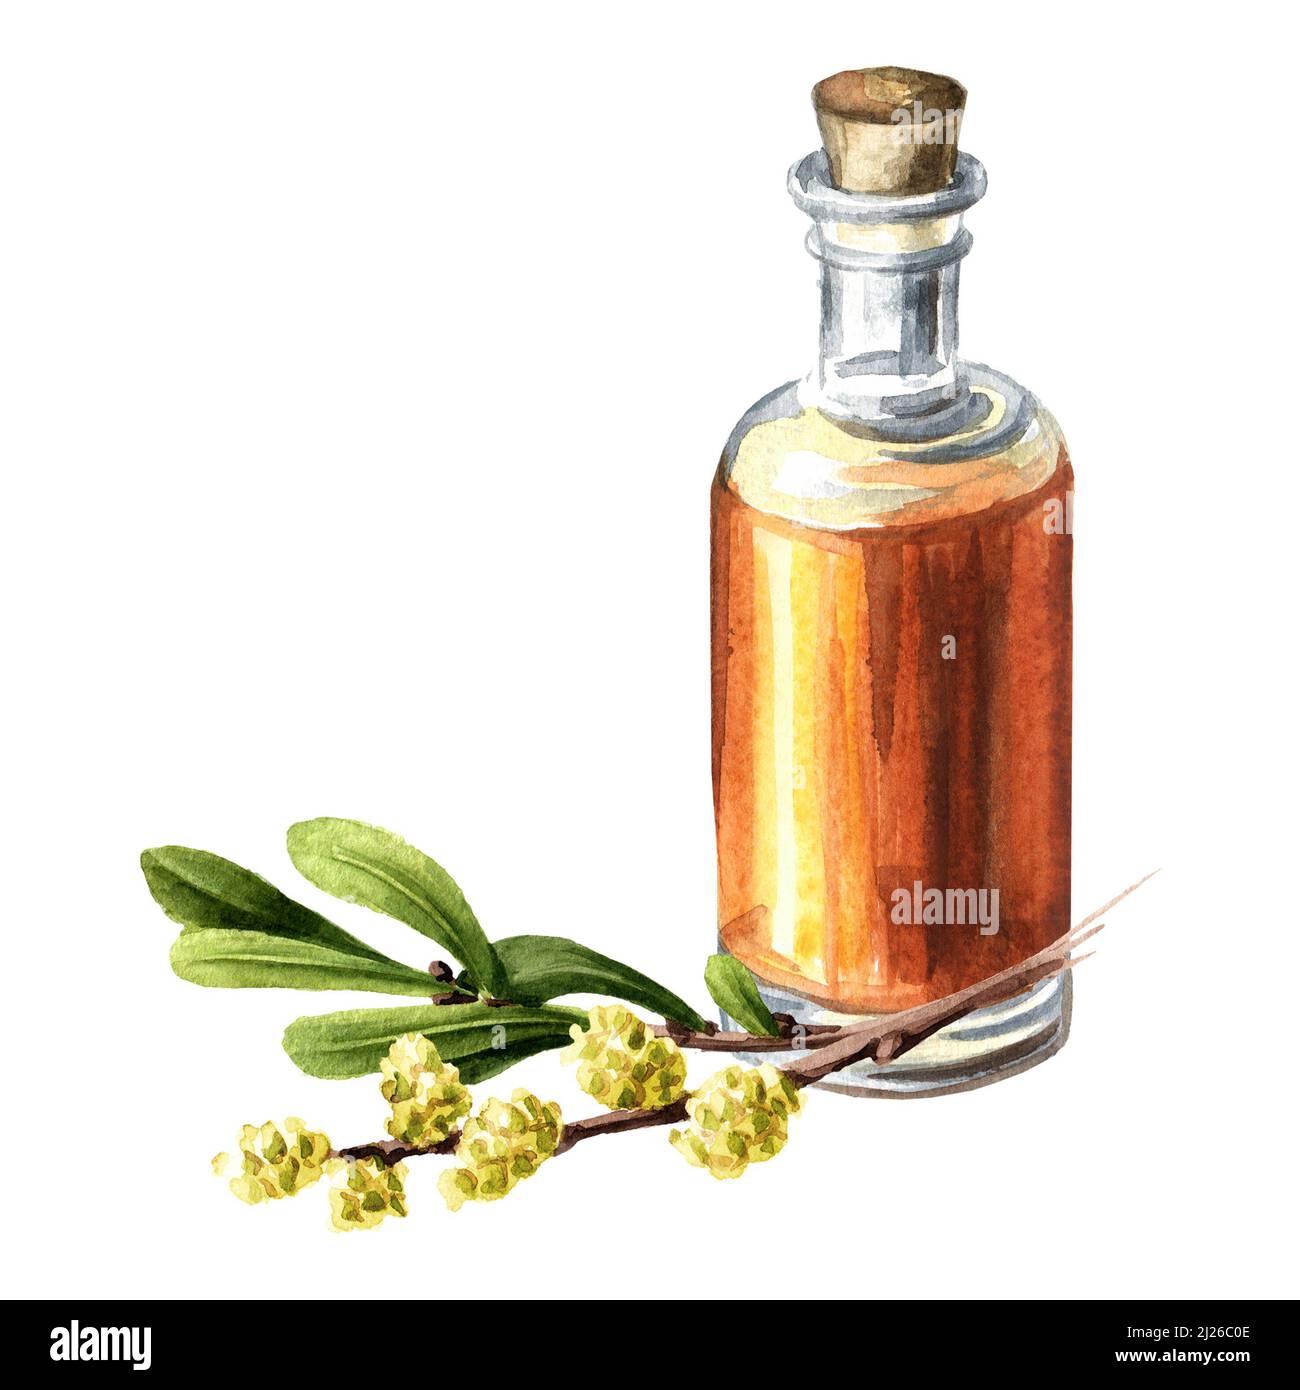 Bog myrtle tincture, medicinal plant. Hand drawn watercolor illustration isolated on white background Stock Photo